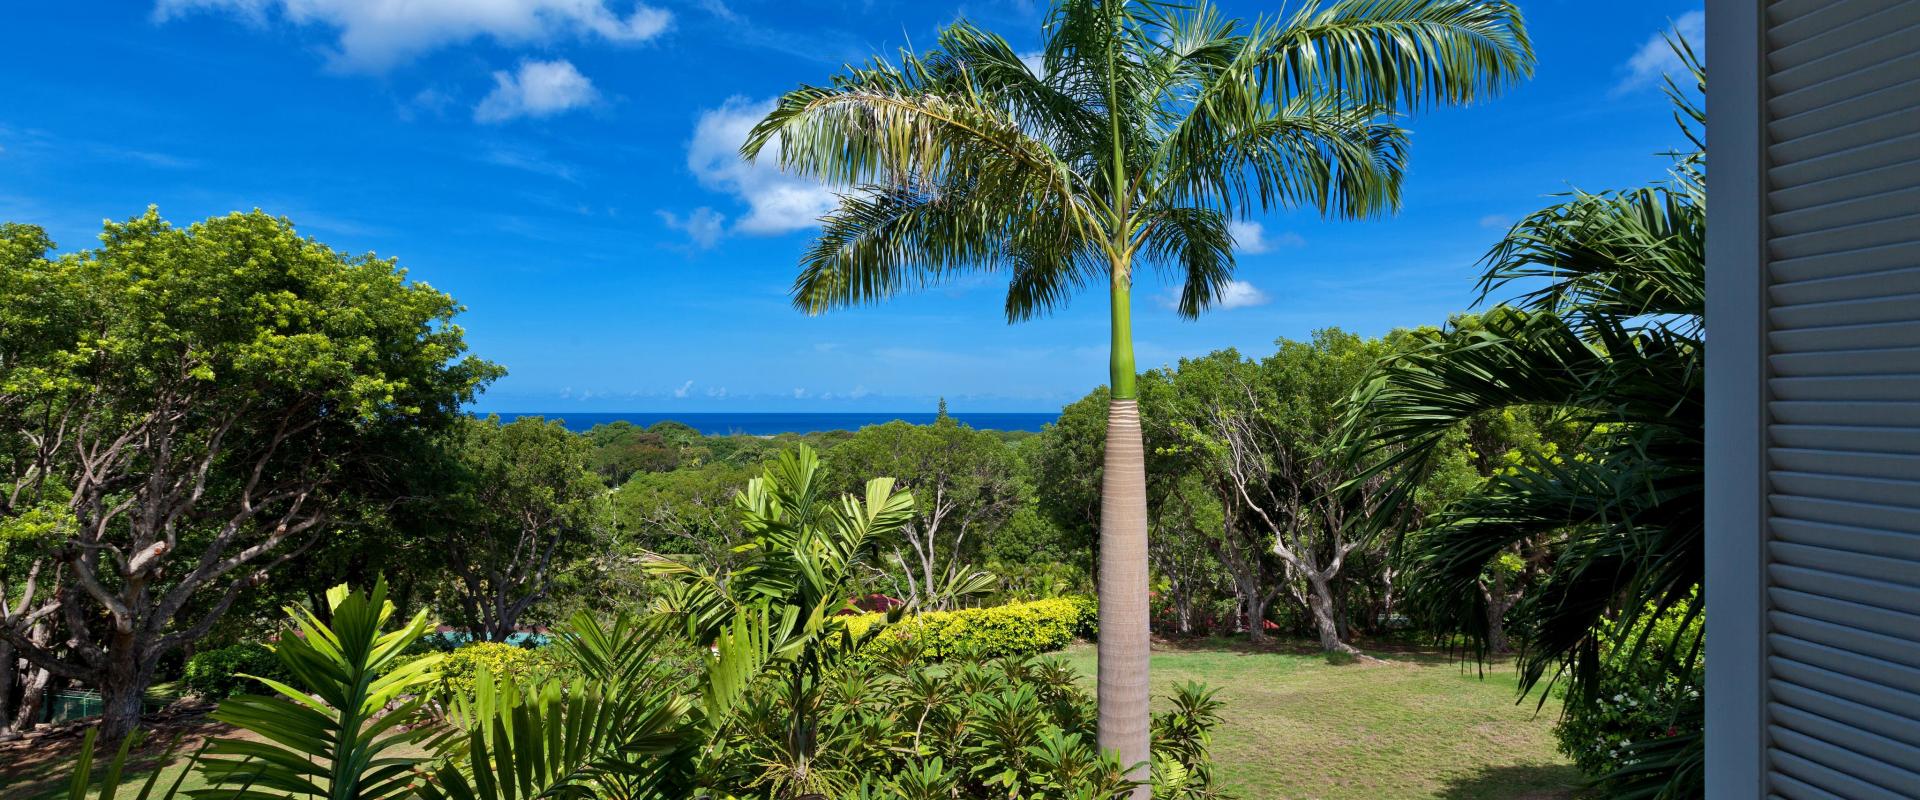 Sandy Lane Holiday Villa Barbados Halle Rose Garden View from Pool Deck